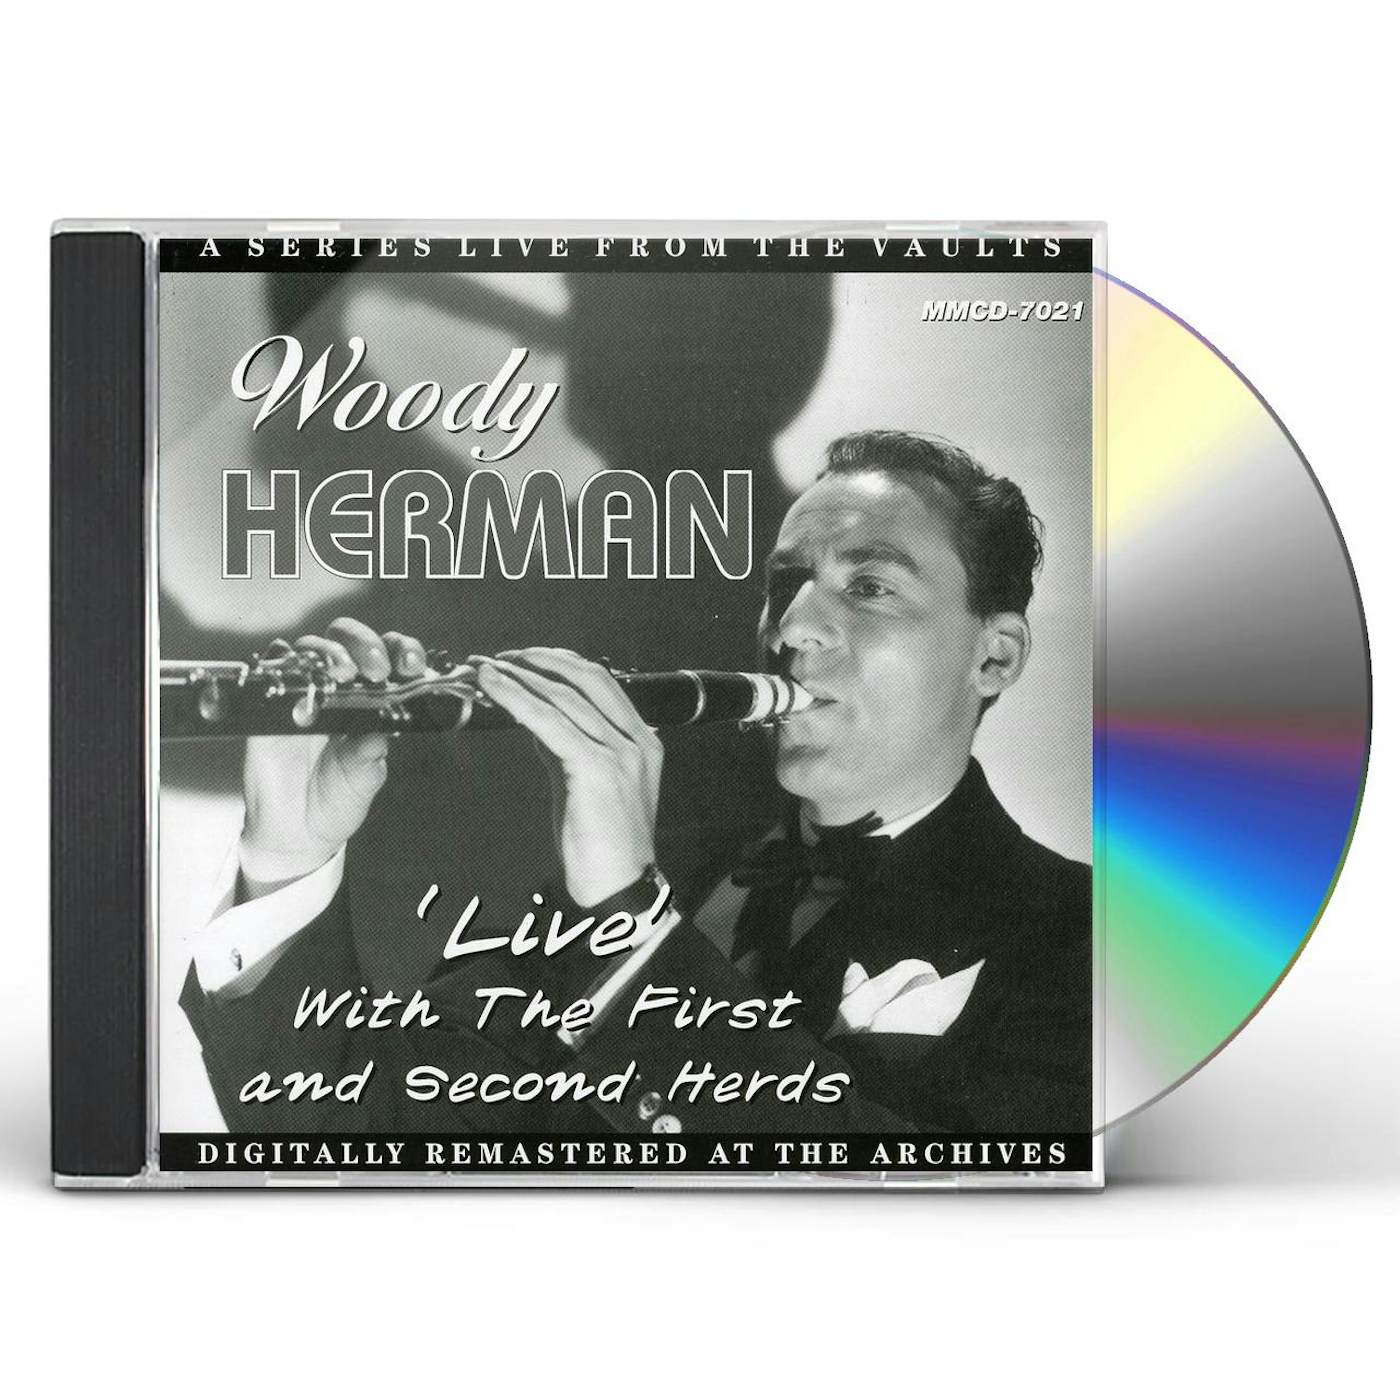 Woody Herman LIVE WITH THE FIRST & SECOND HERDS CD